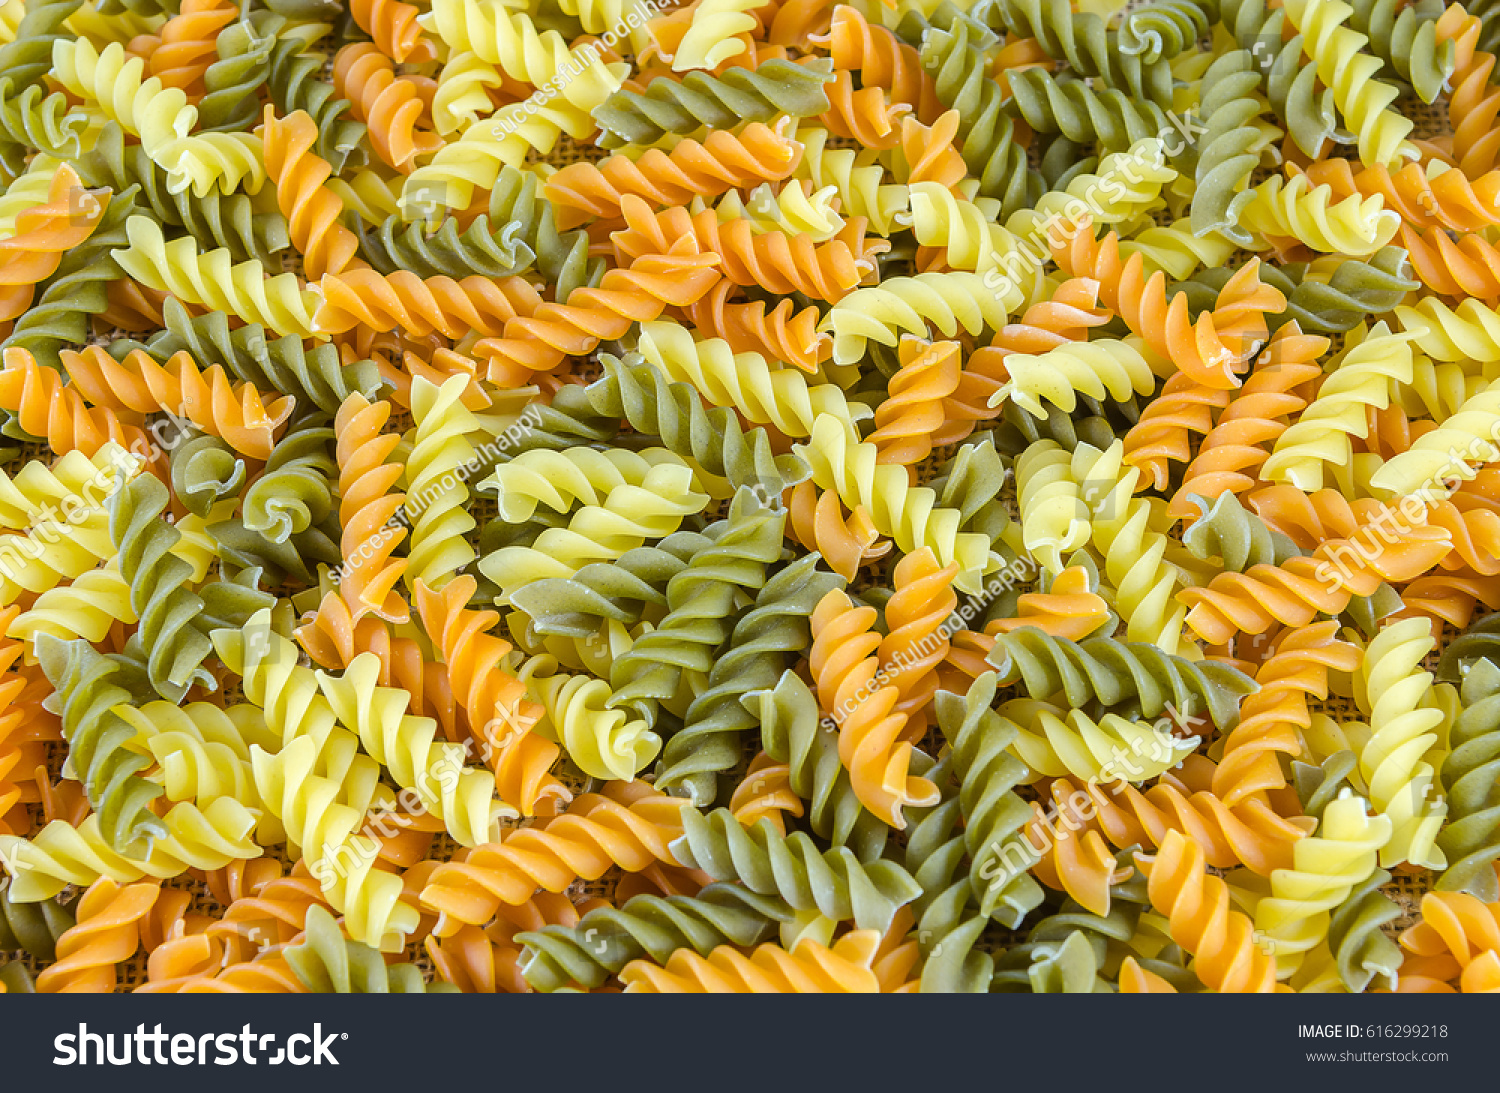 Download Pasta Many Colors Green Orange Yellow Stock Photo Edit Now 616299218 Yellowimages Mockups